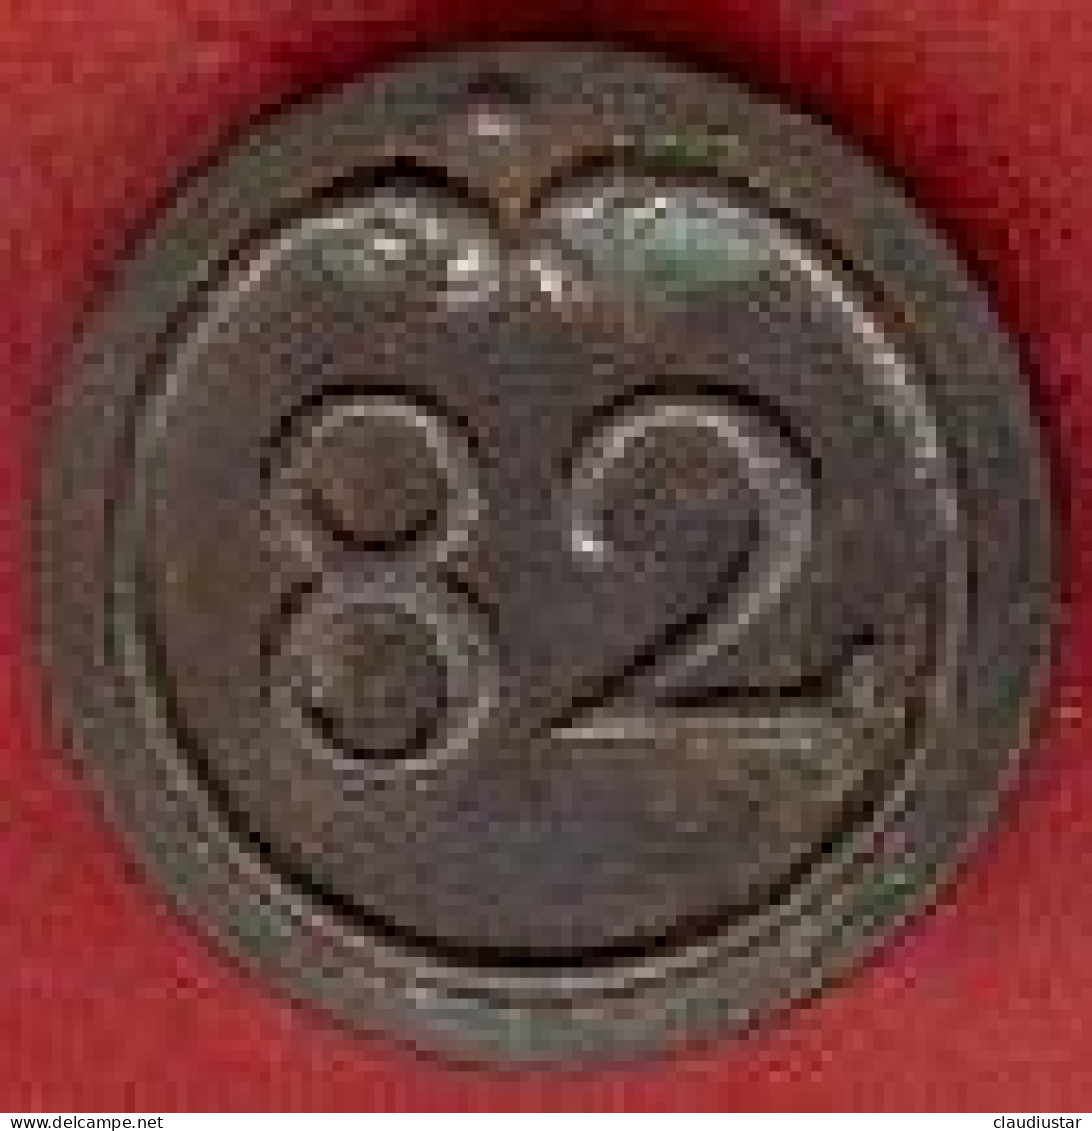 ** BOUTON  1er  EMPIRE  N° 82  P. M. ** - Buttons